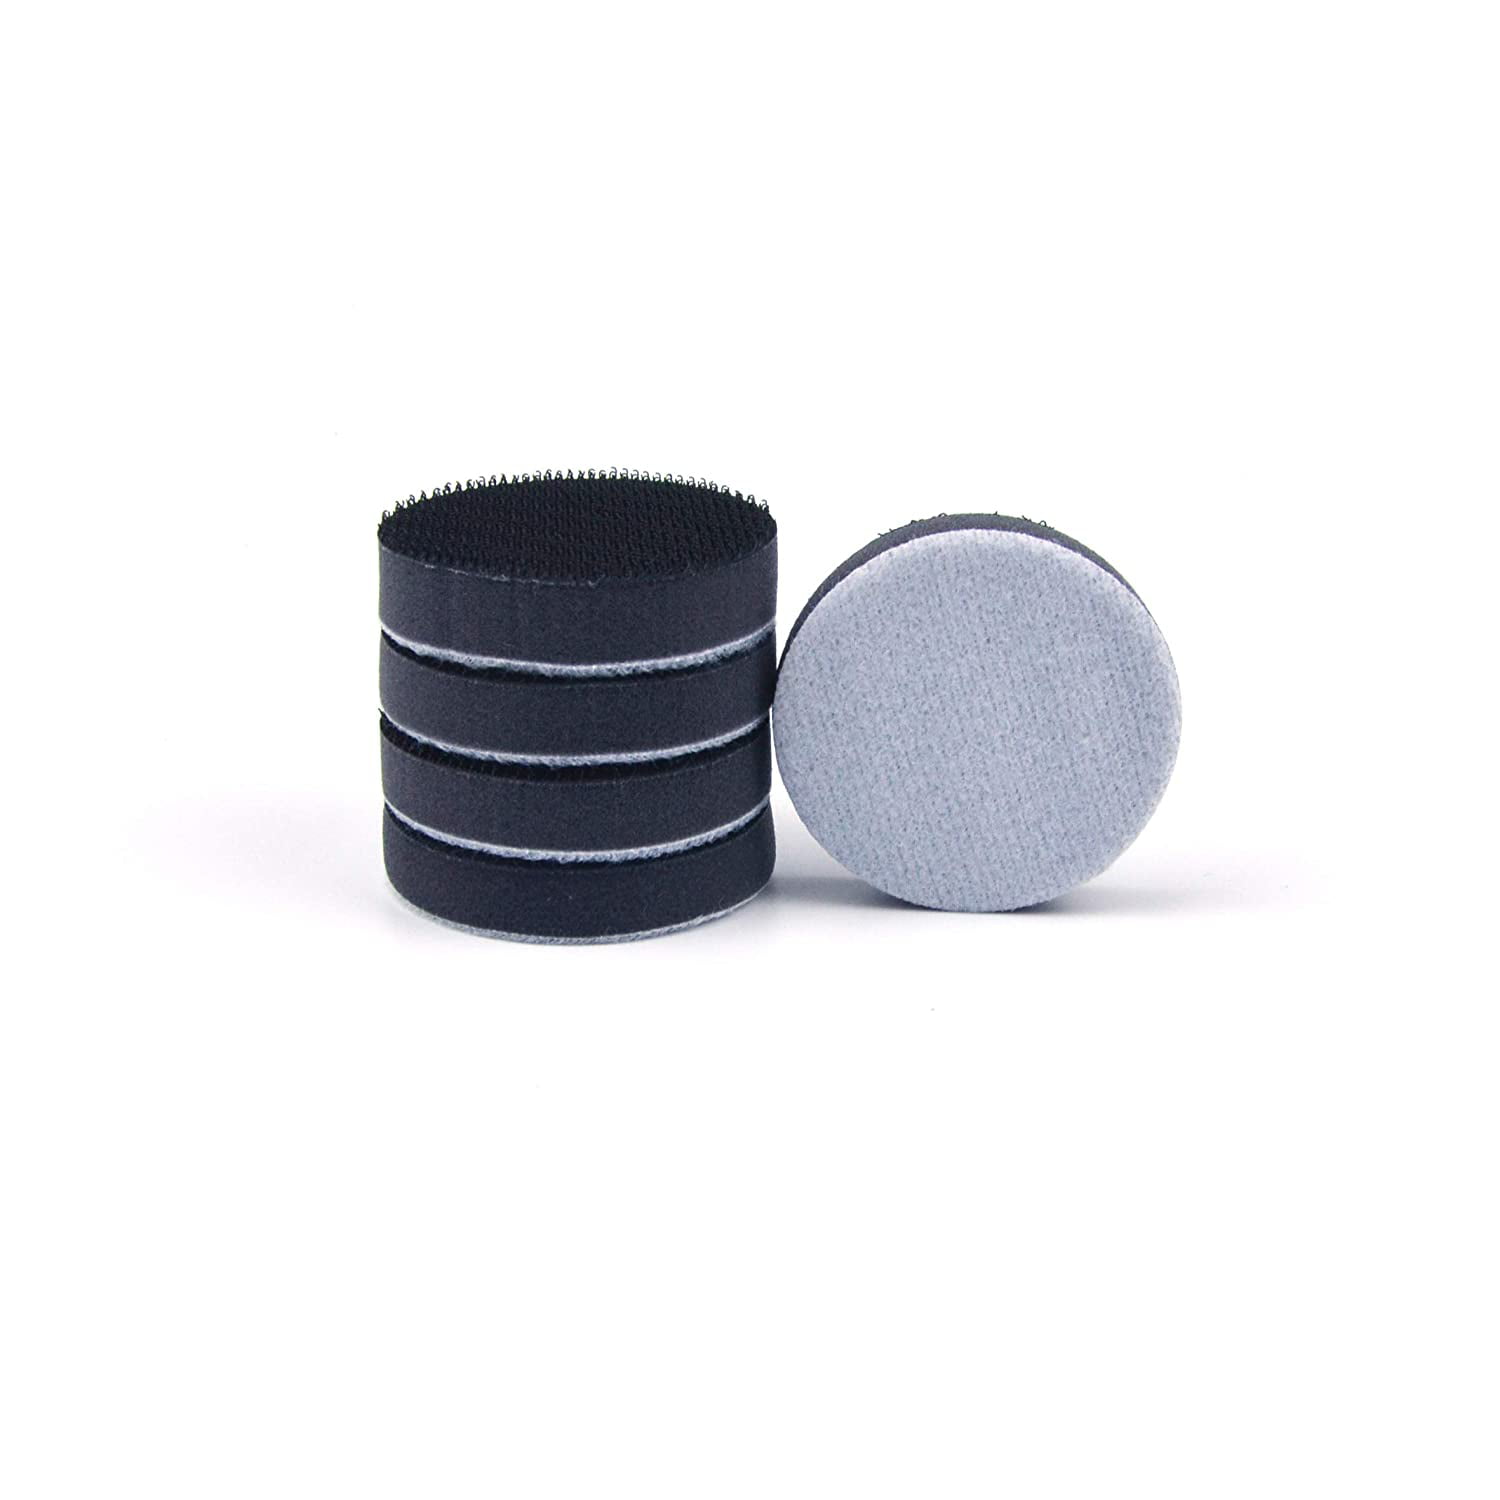 2 Inch Hook and Loop Sanding Pad with Soft Foam Layer Buffering Pad 